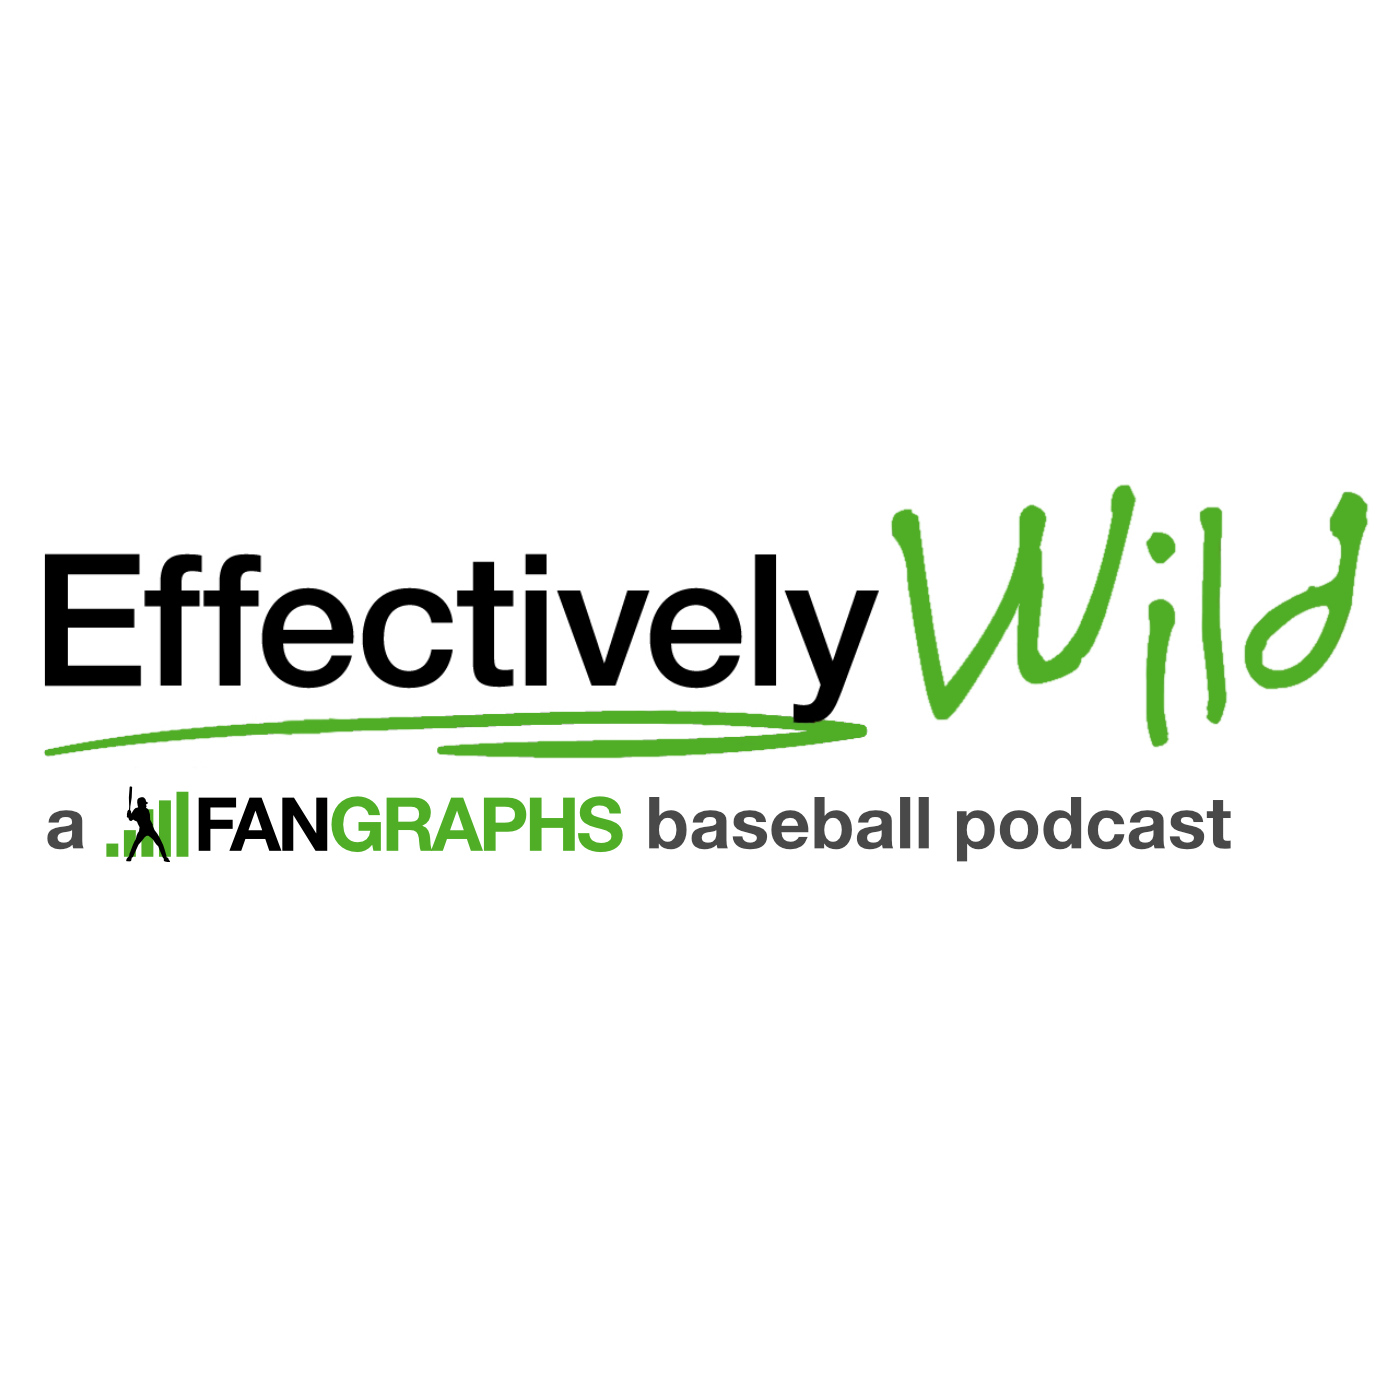 A highlight from Effectively Wild Episode 1876: Overbooked